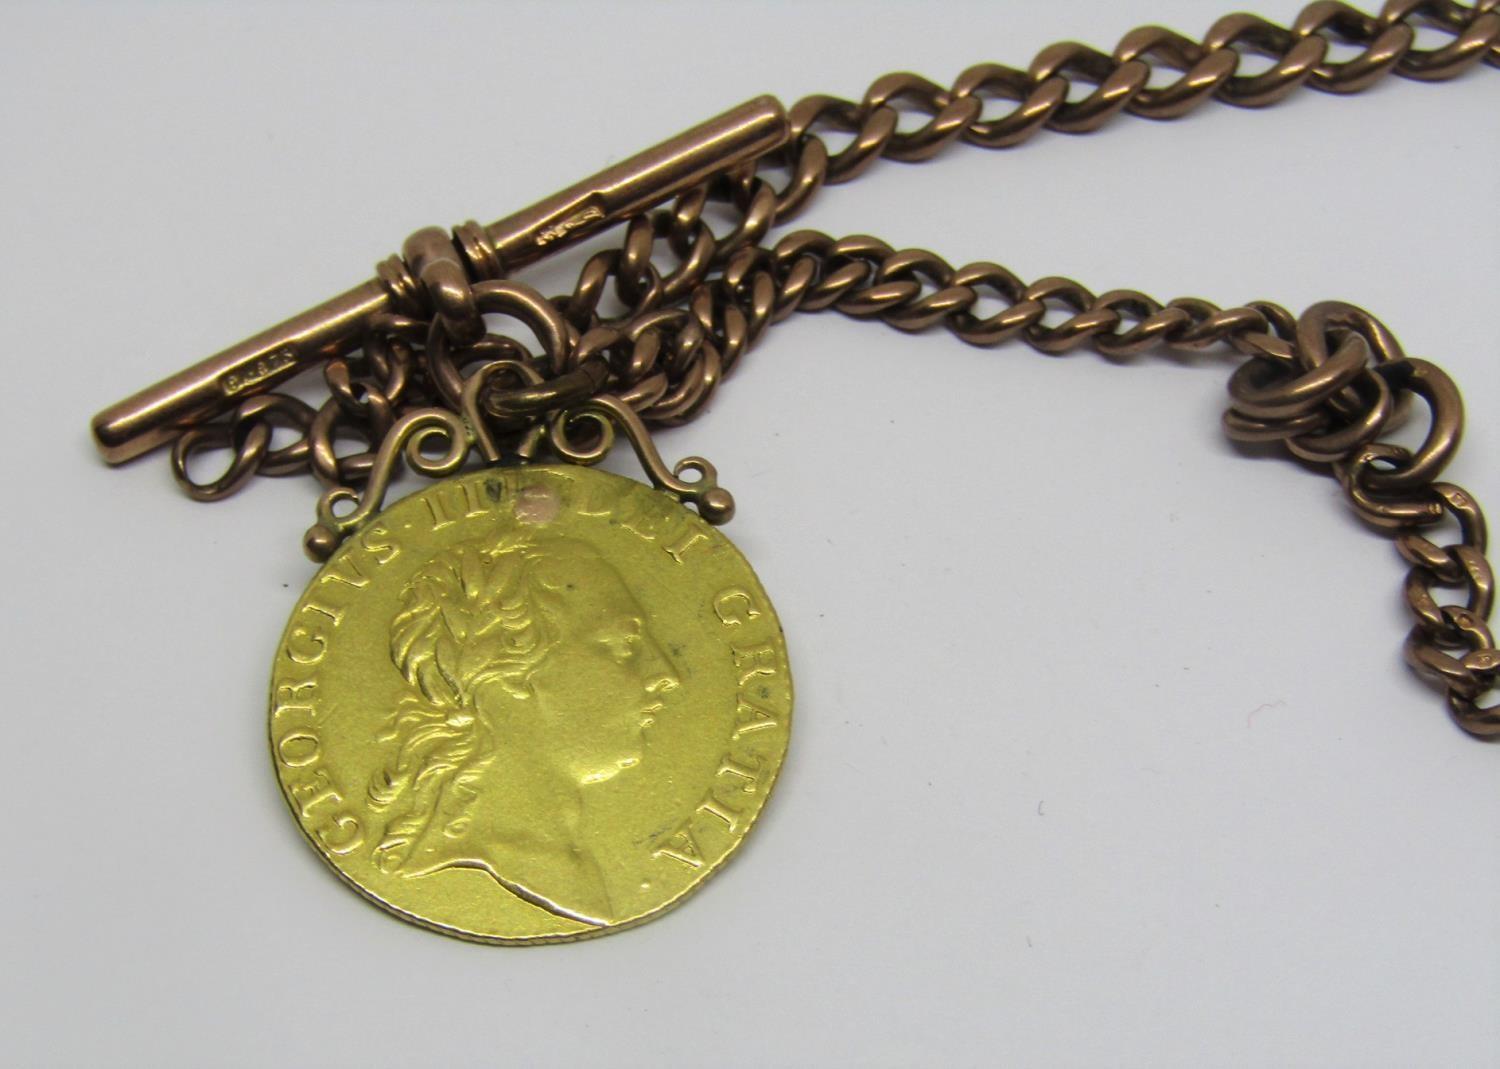 9ct Albert chain with T-bar, hung with a George III 1761 guinea, 38.5g - Image 2 of 2